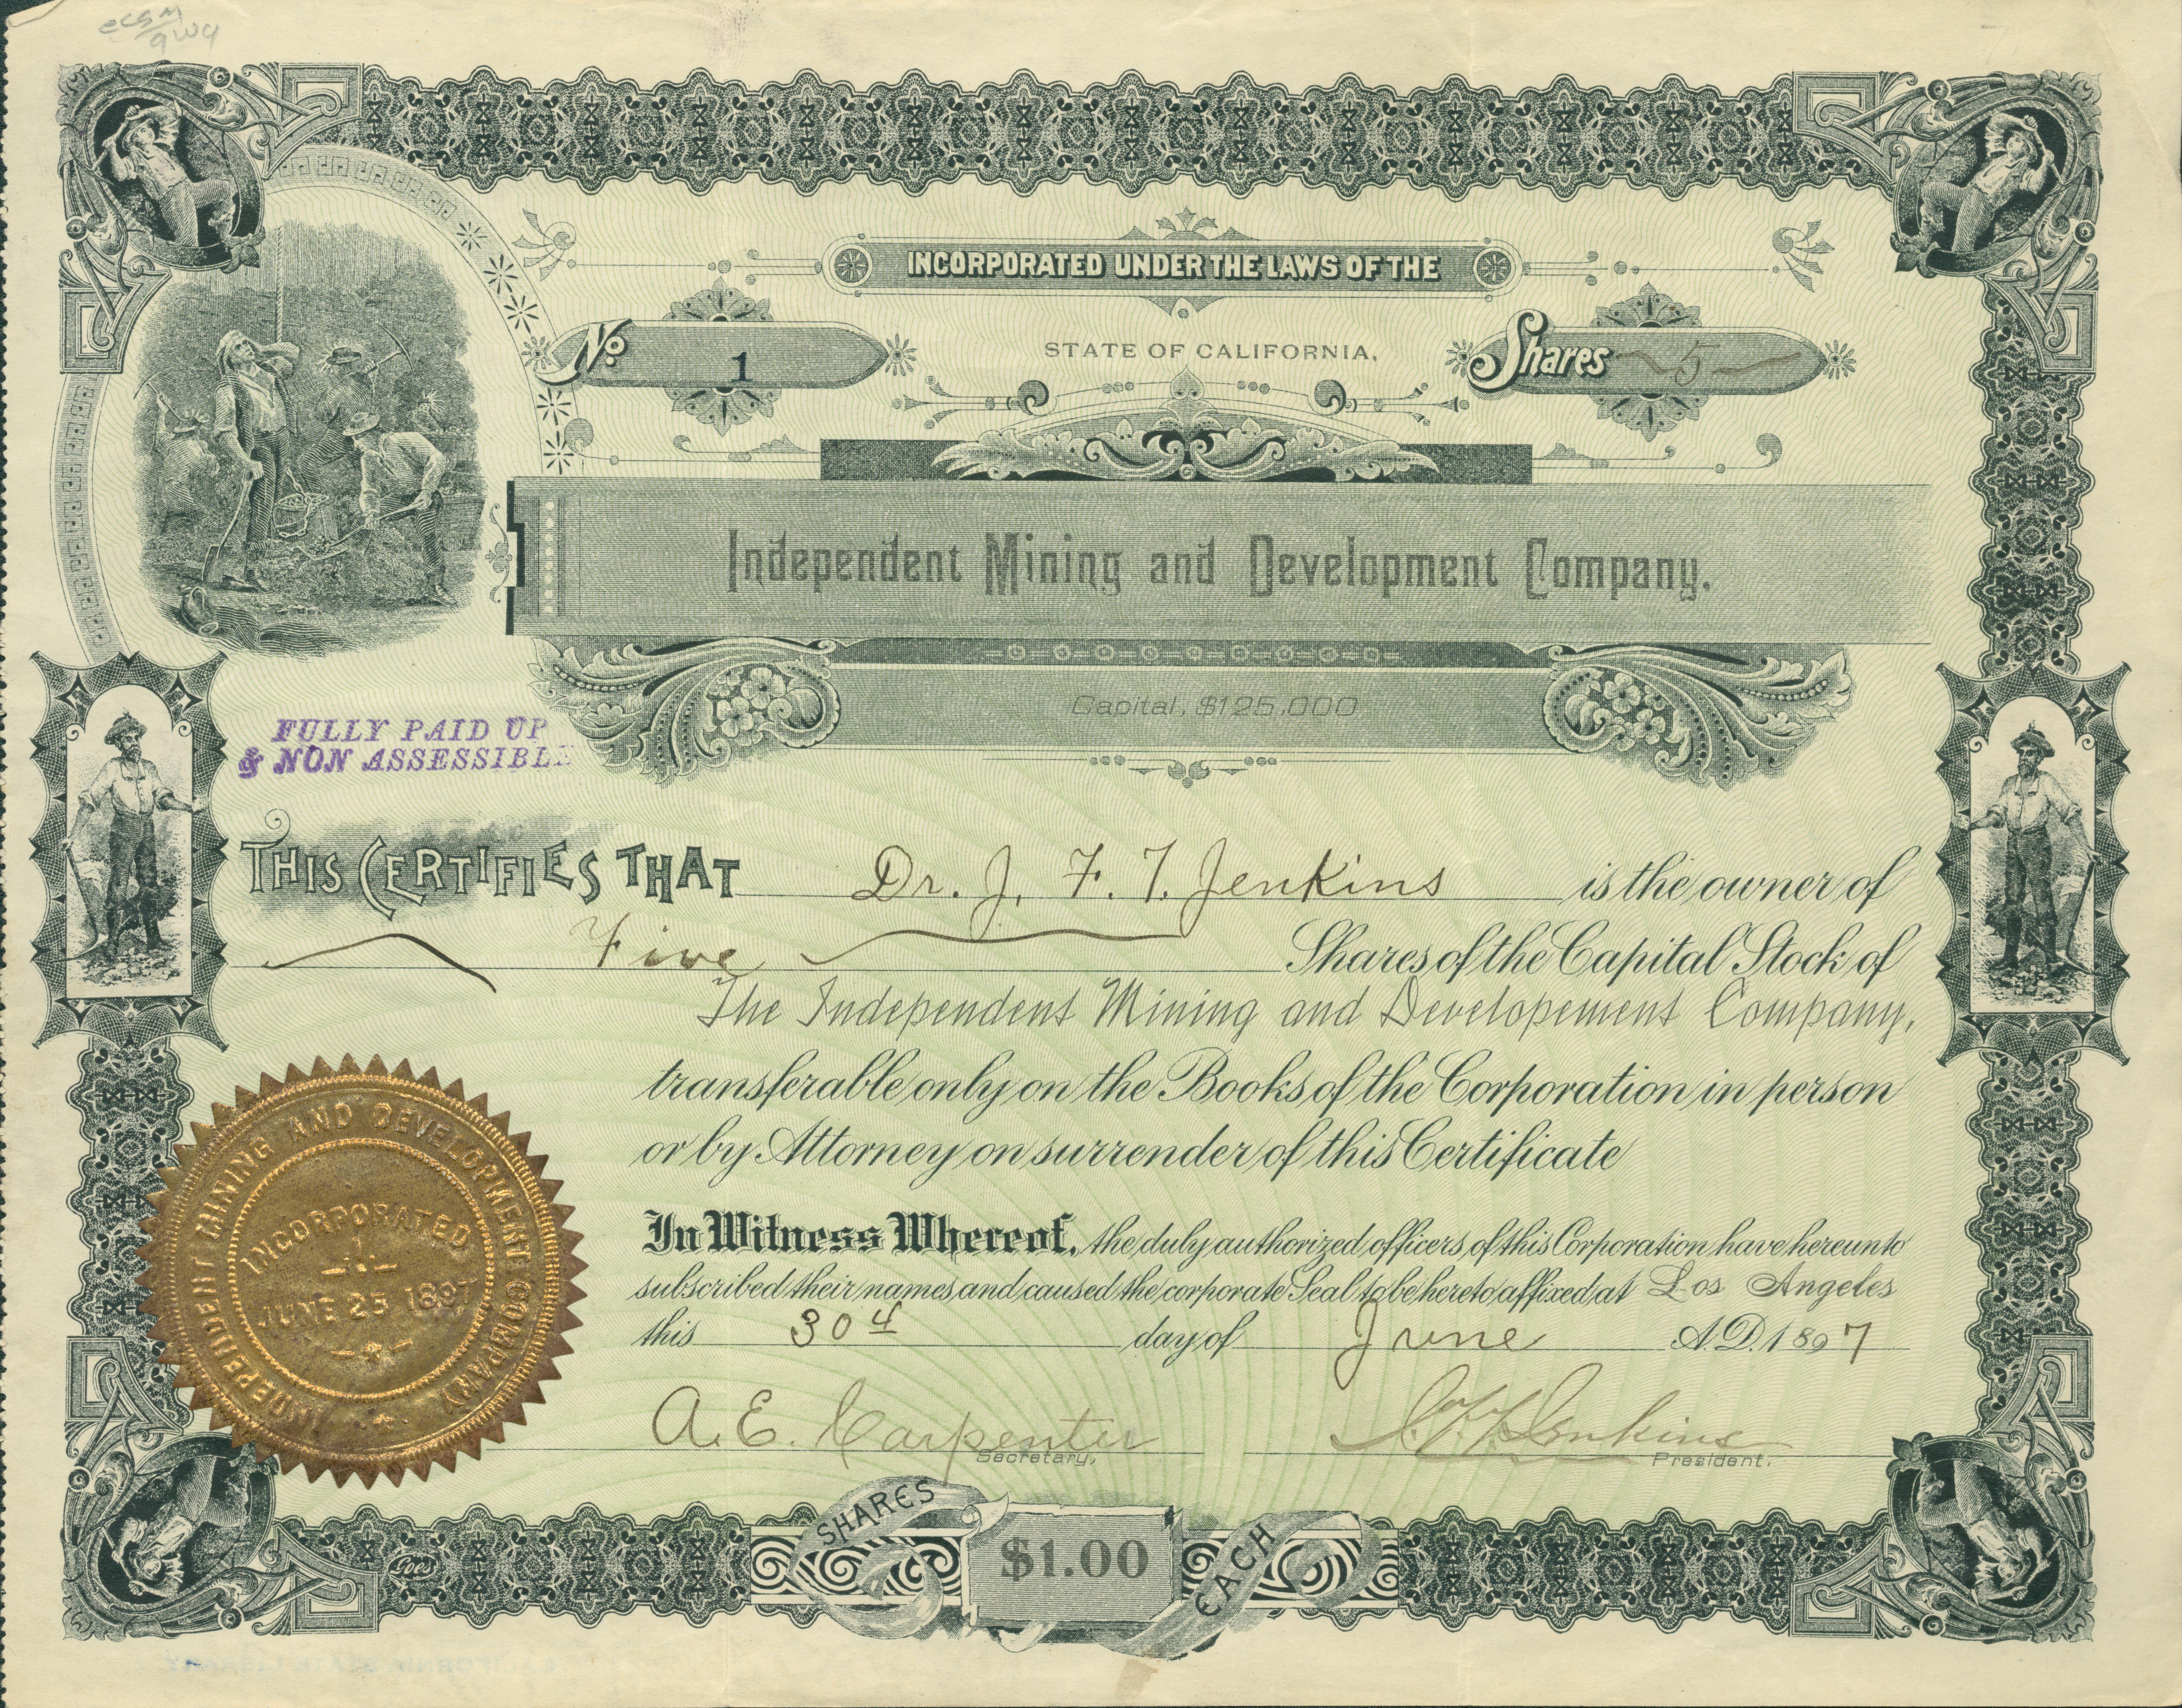 Certificate, No. 1, signed by  Dr. J. F. T. Jenkins for 5 shares. Lithographed border with mining vignettes and Company gold seal.